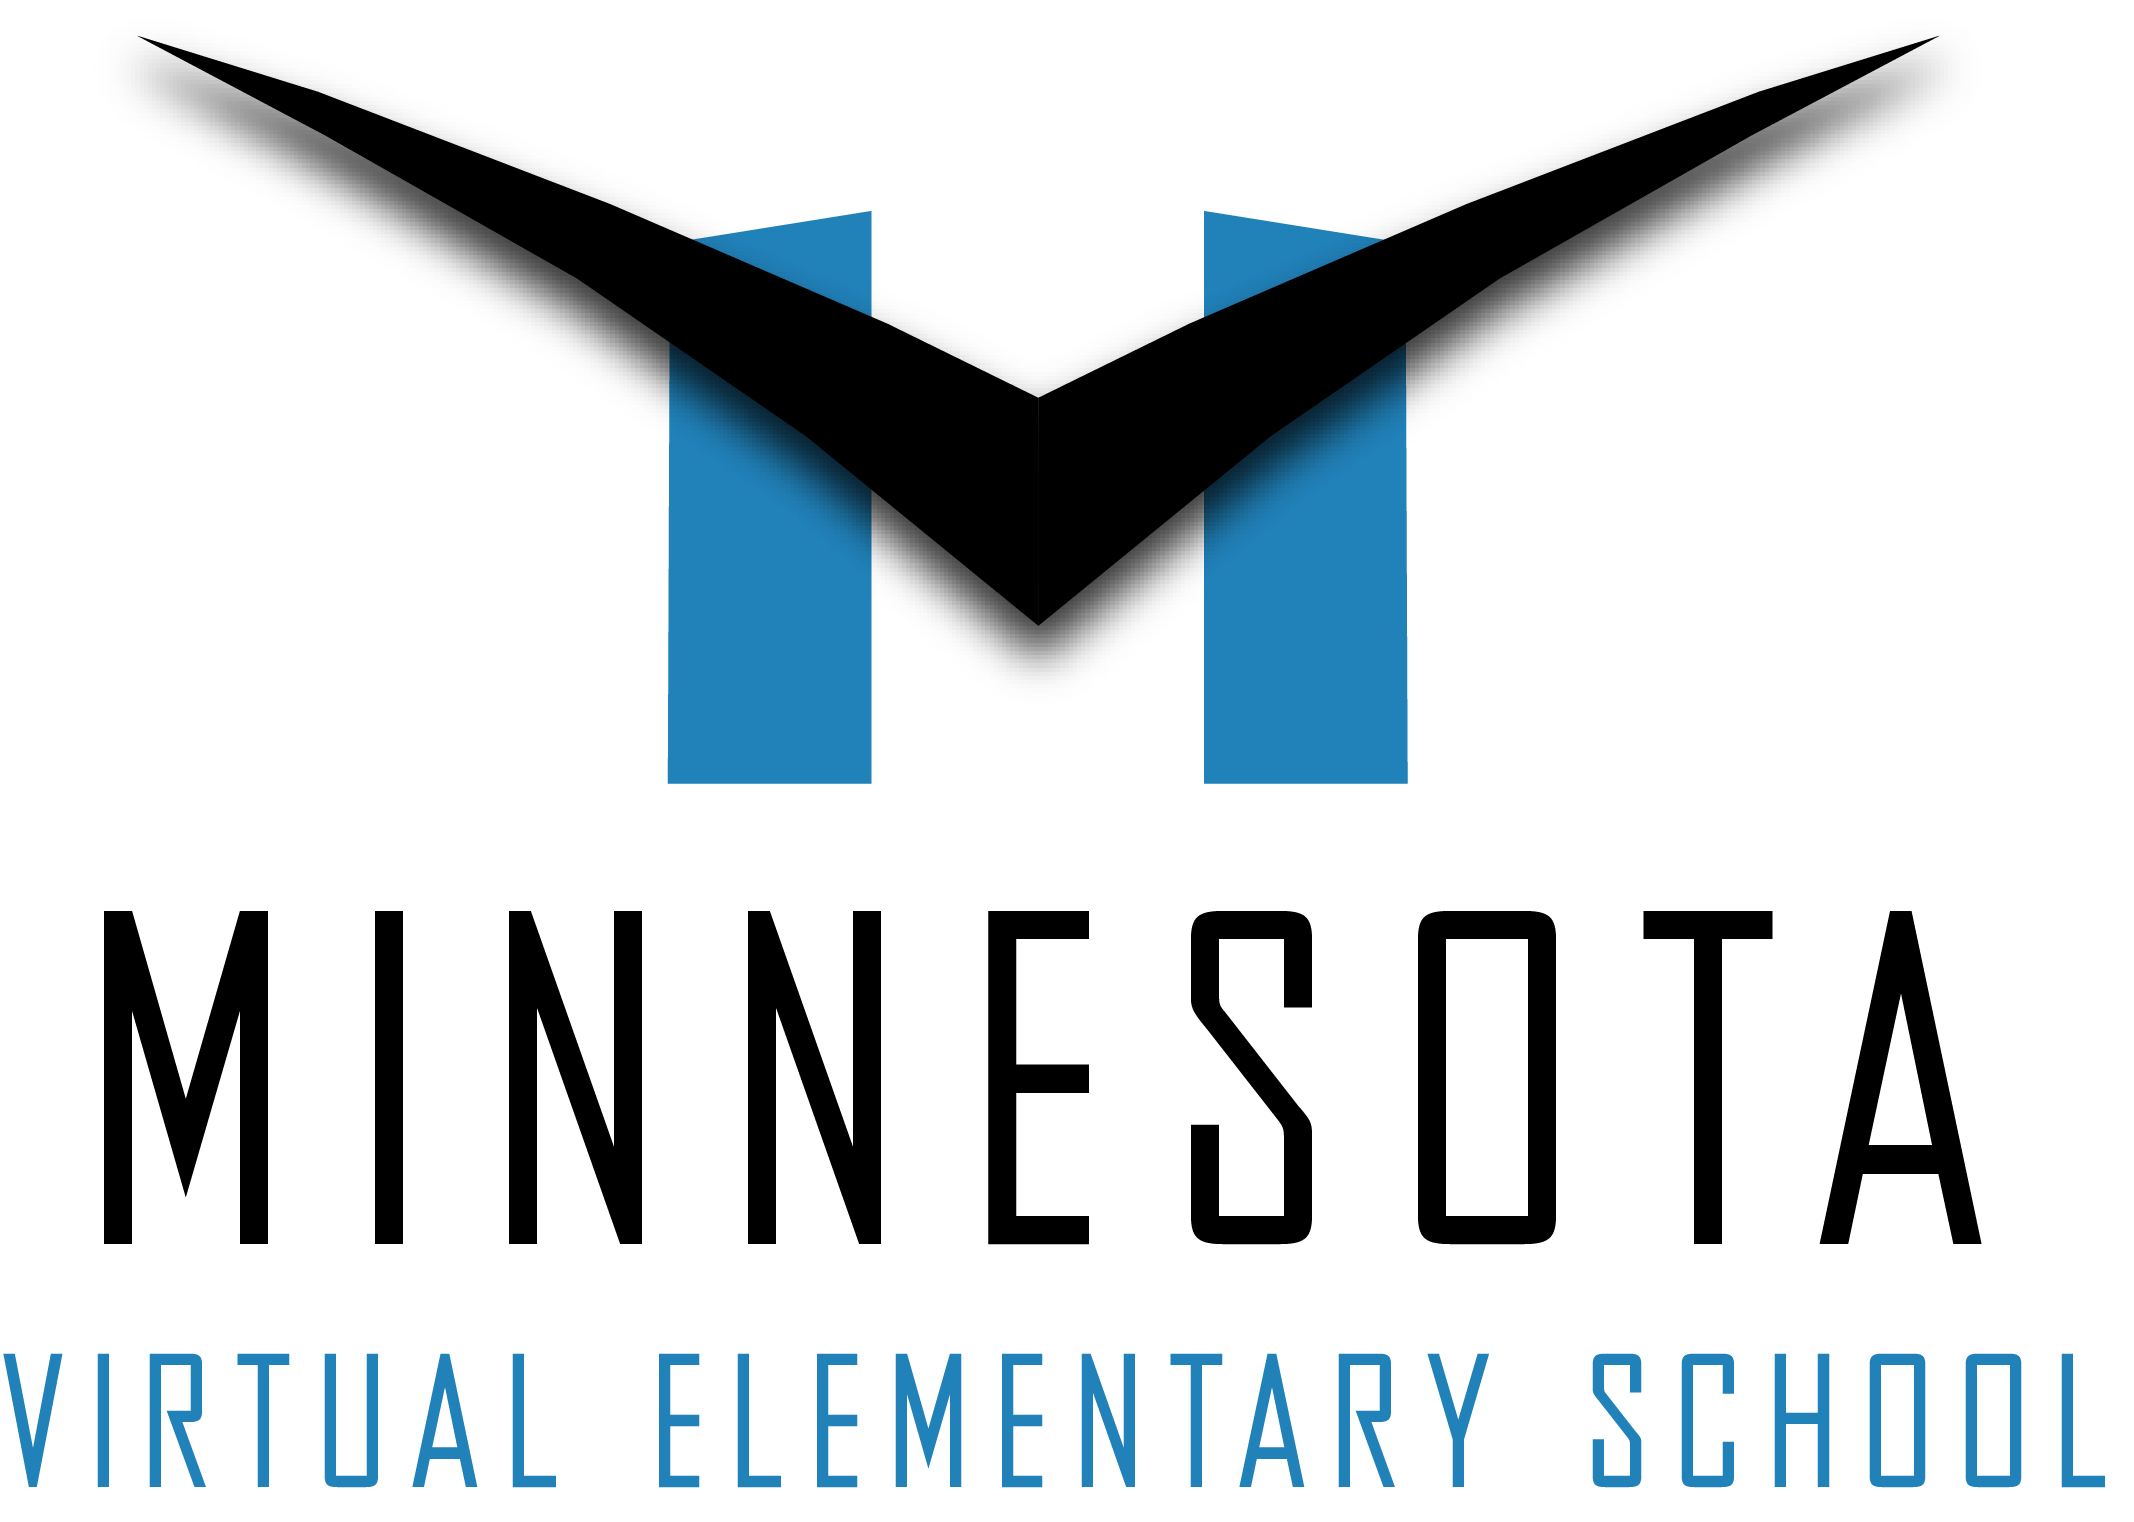 Minnesota Virtual Elementary Schools - The online school that works with you!